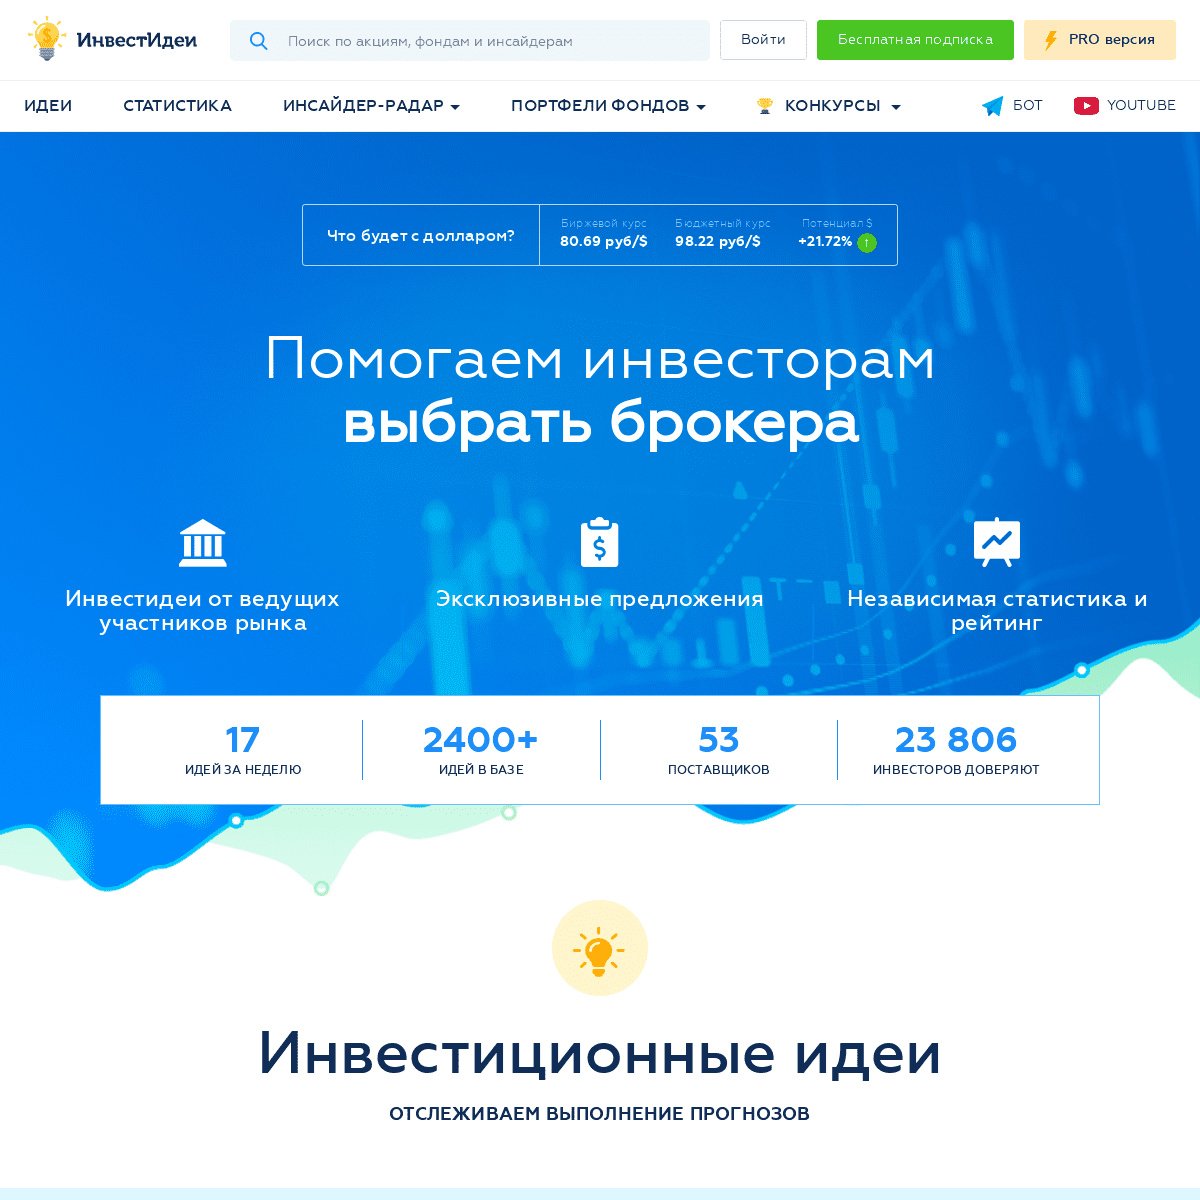 A complete backup of invest-idei.ru